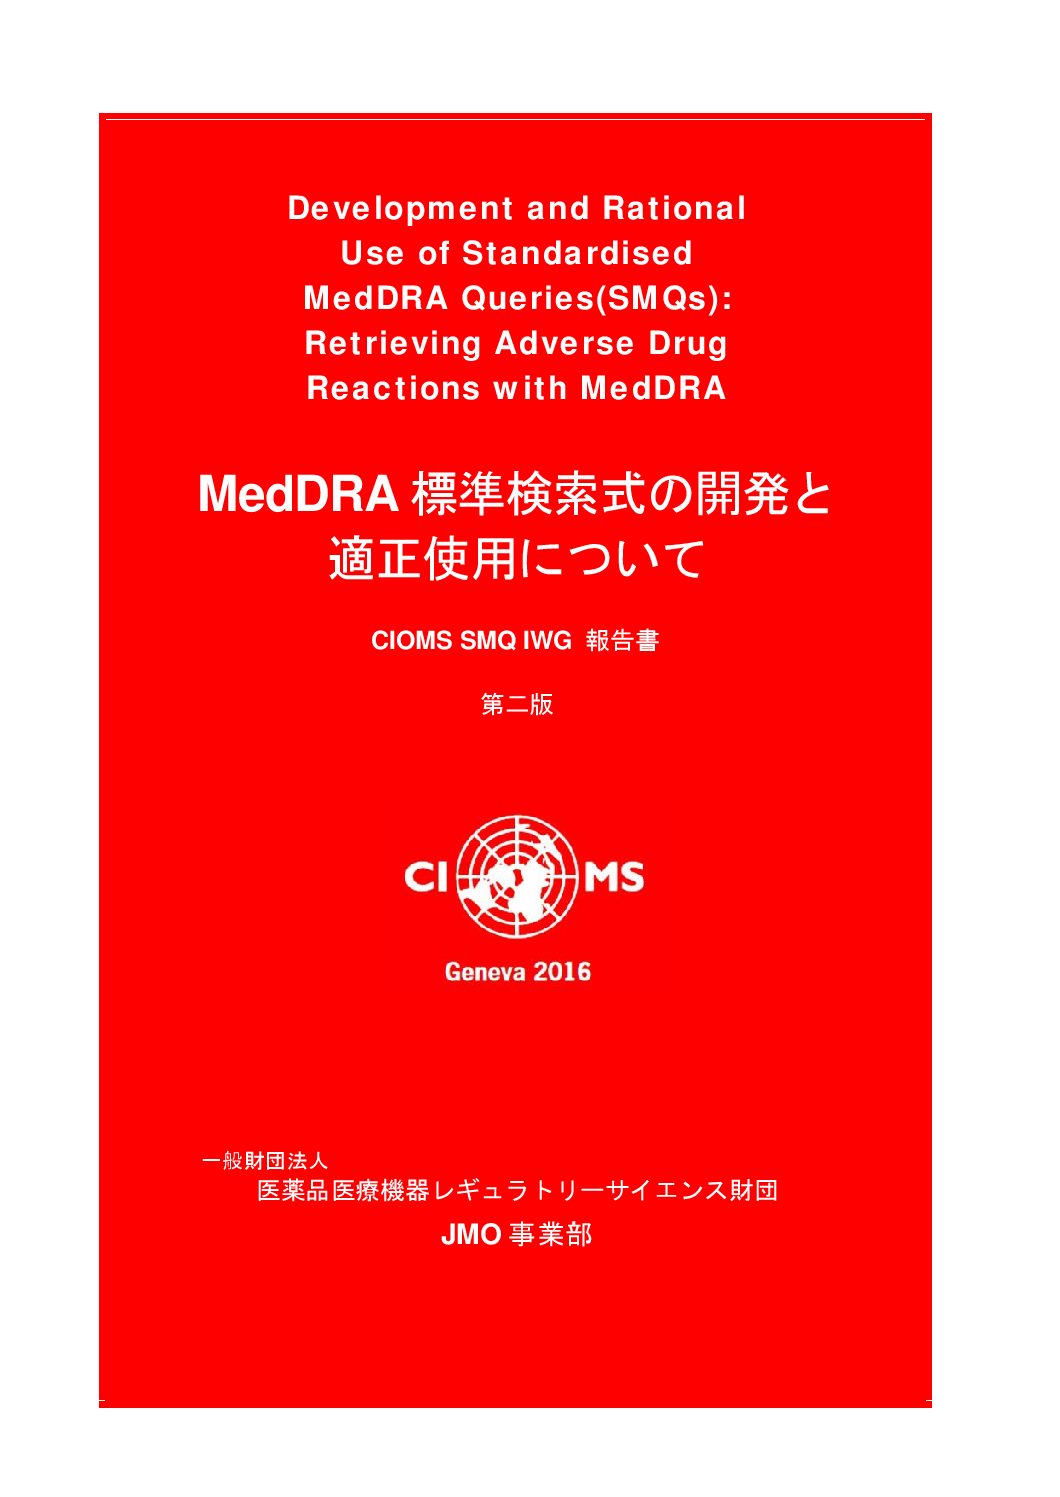 Japanese translation: Development and Rational Use of Standardised MedDRA Queries (SMQs): Retrieving Adverse Drug Reactions with MedDRA